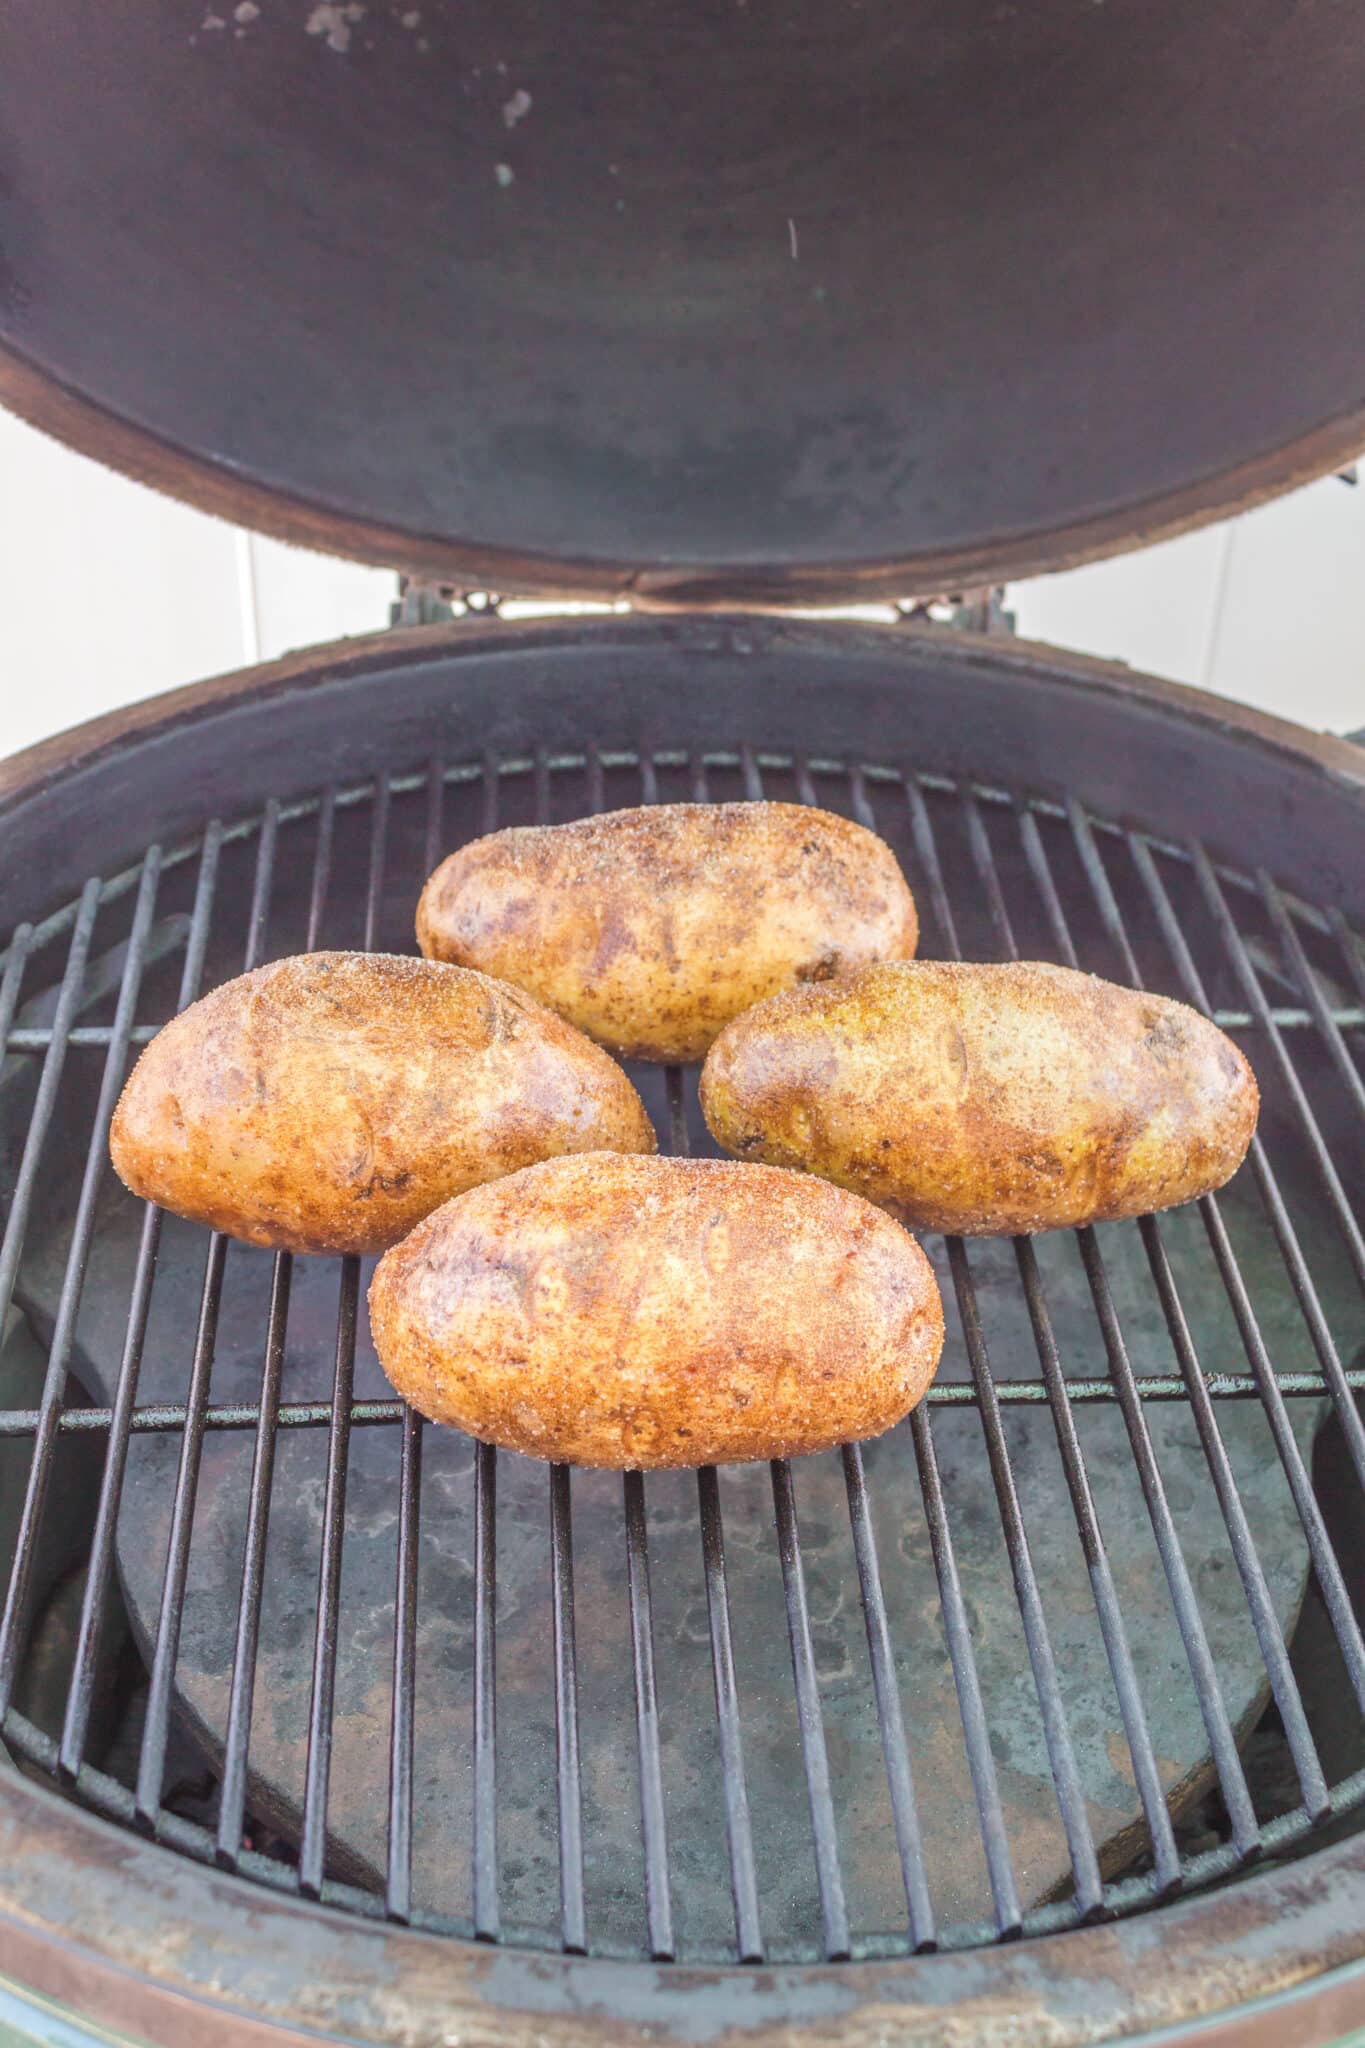 Grilling the potatoes.